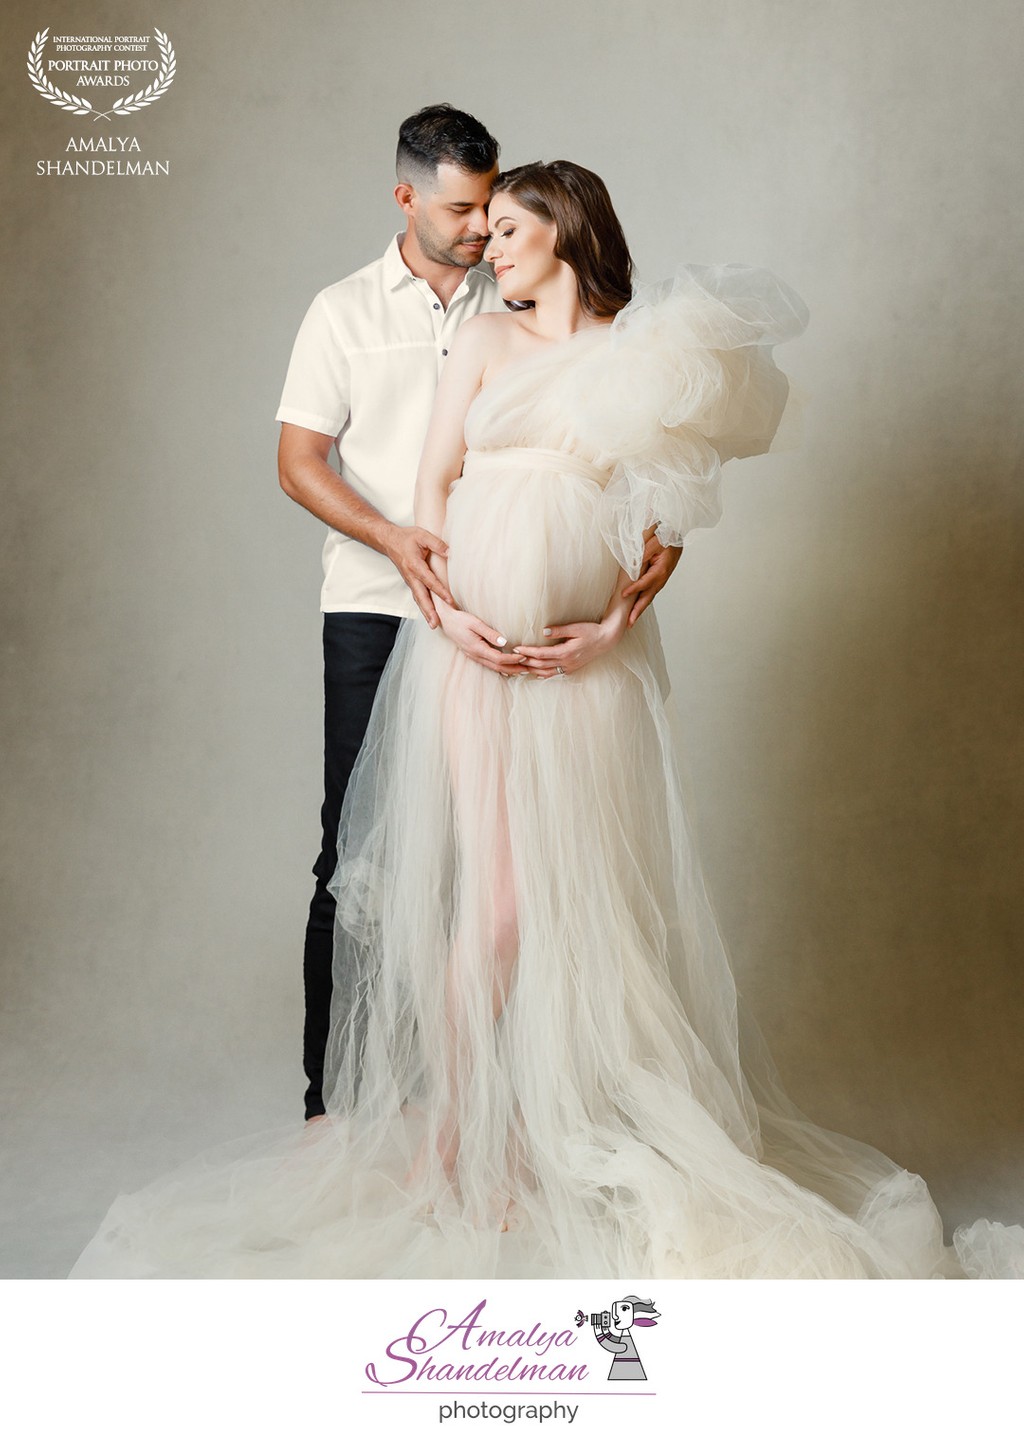 Husband and Wife Maternity Portrait - Capturing the Joy of Expecting Together